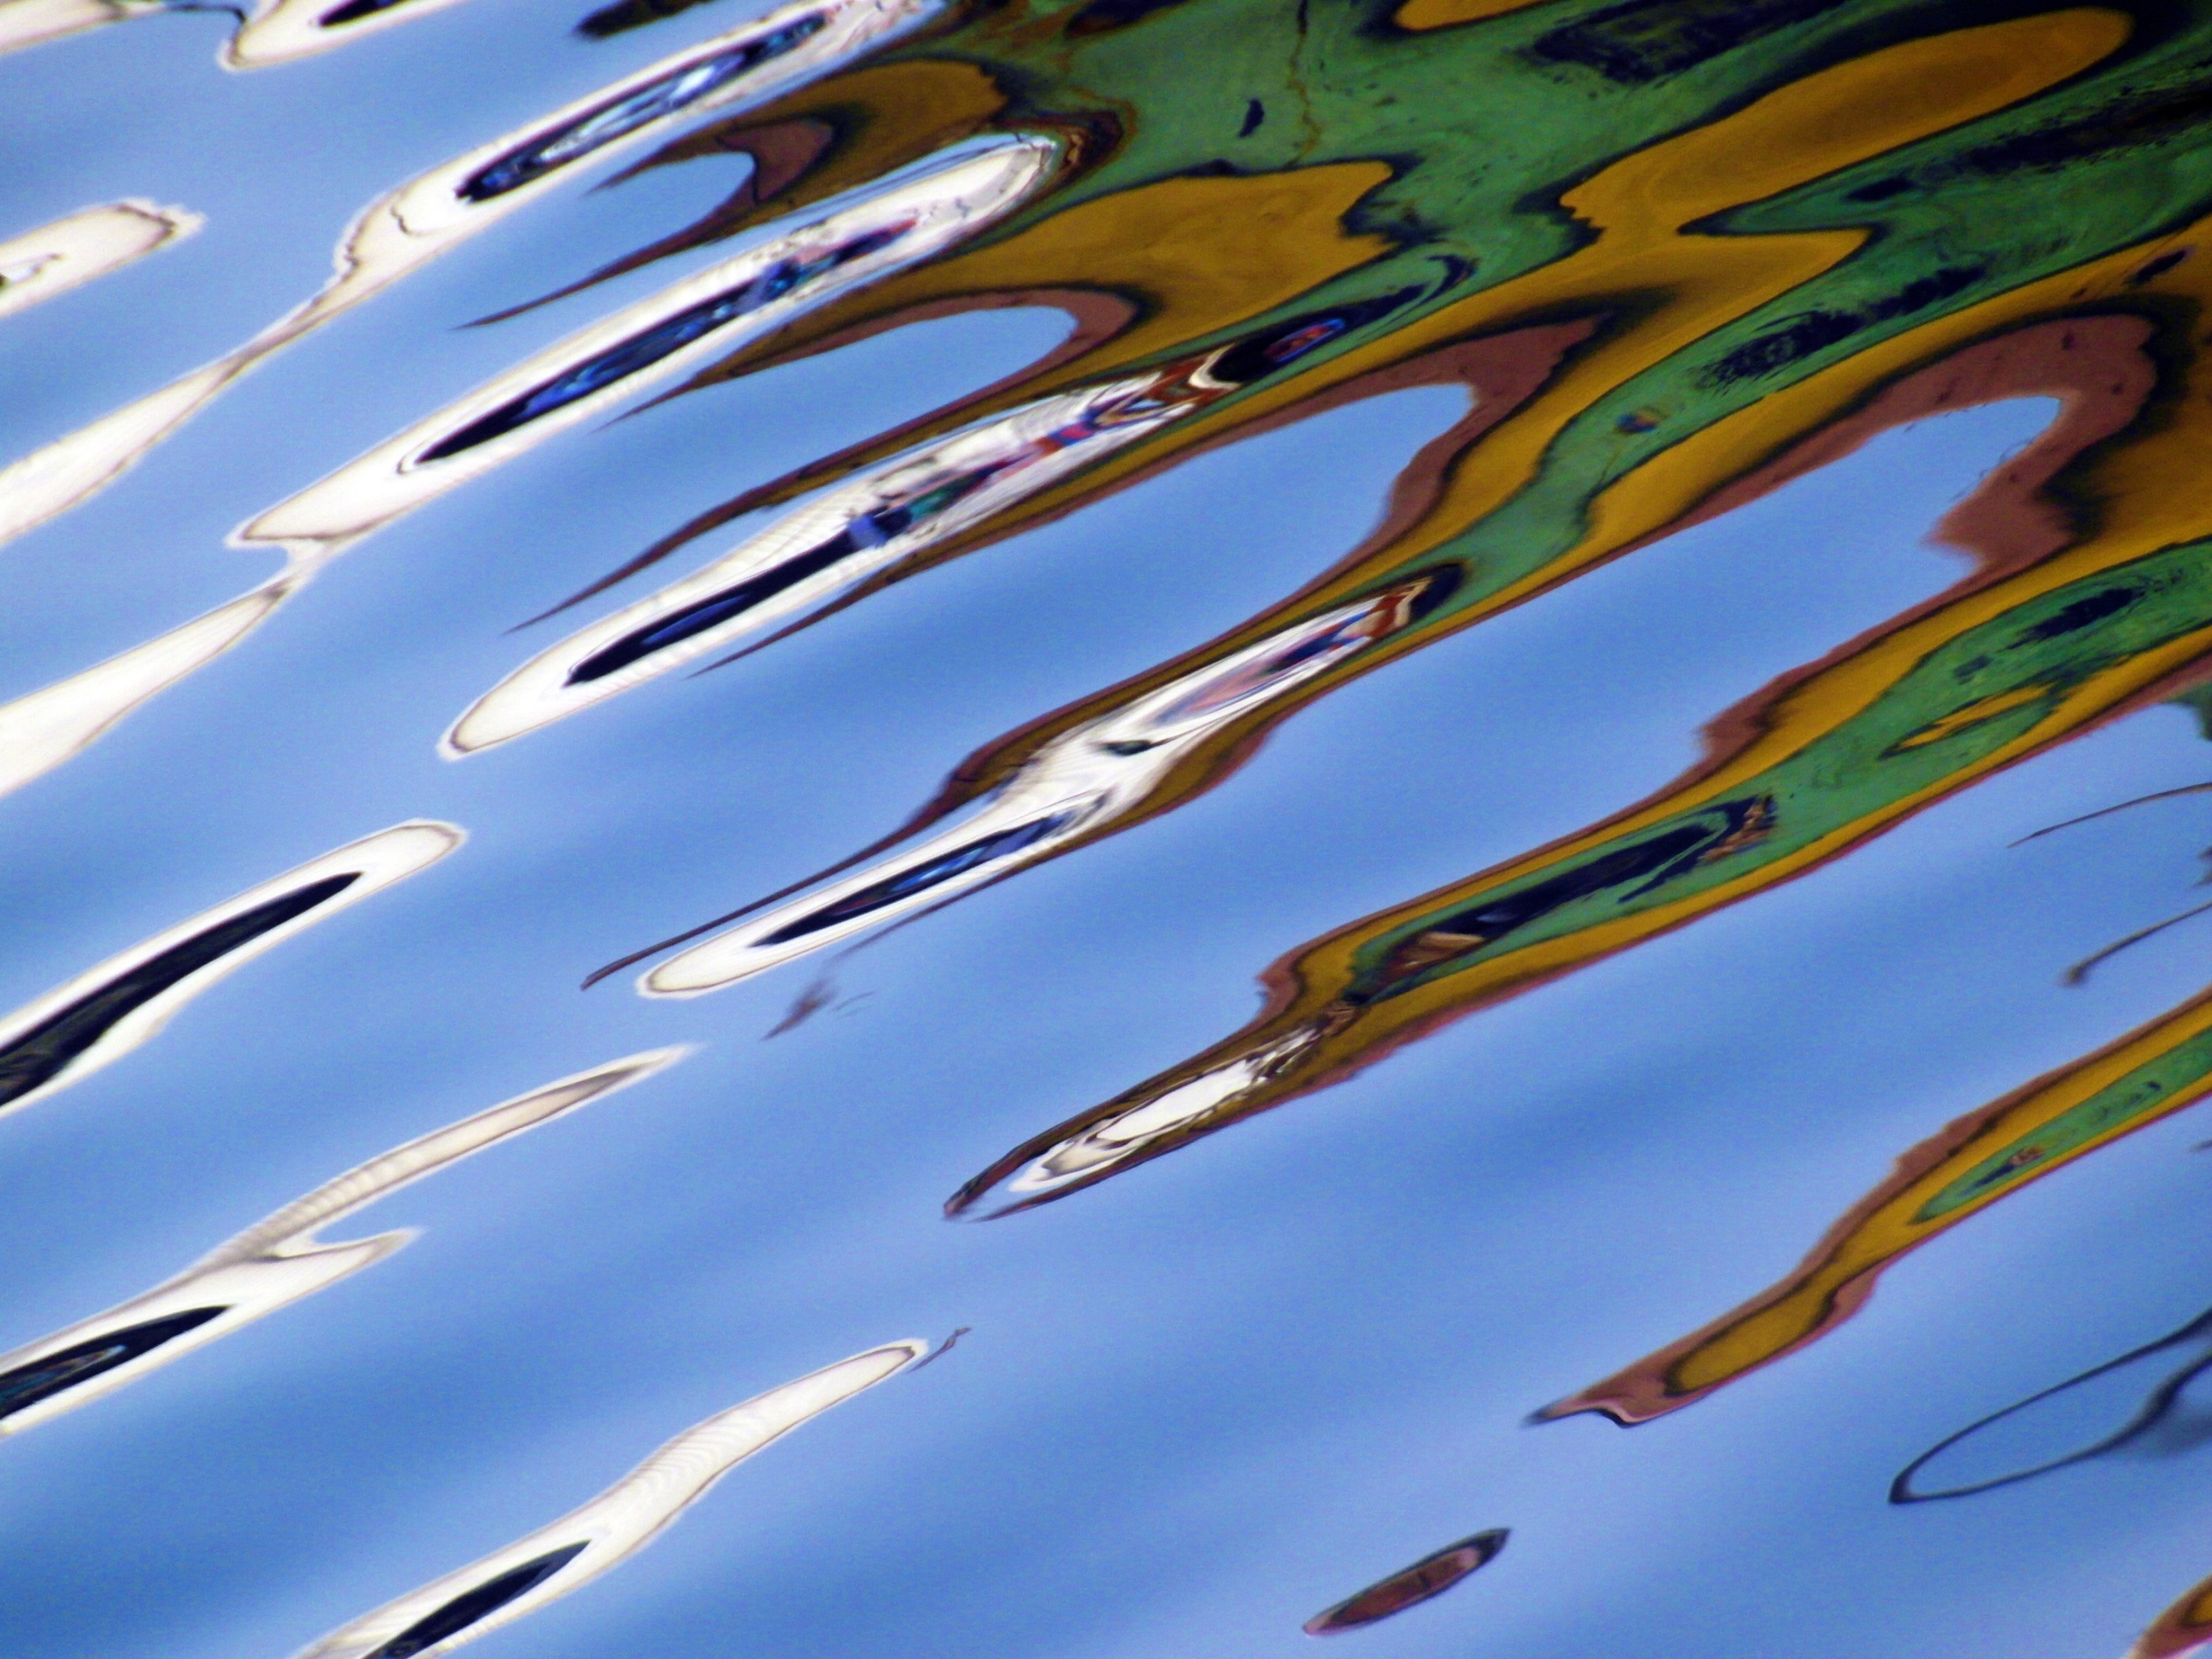 Abstract water ripples photo